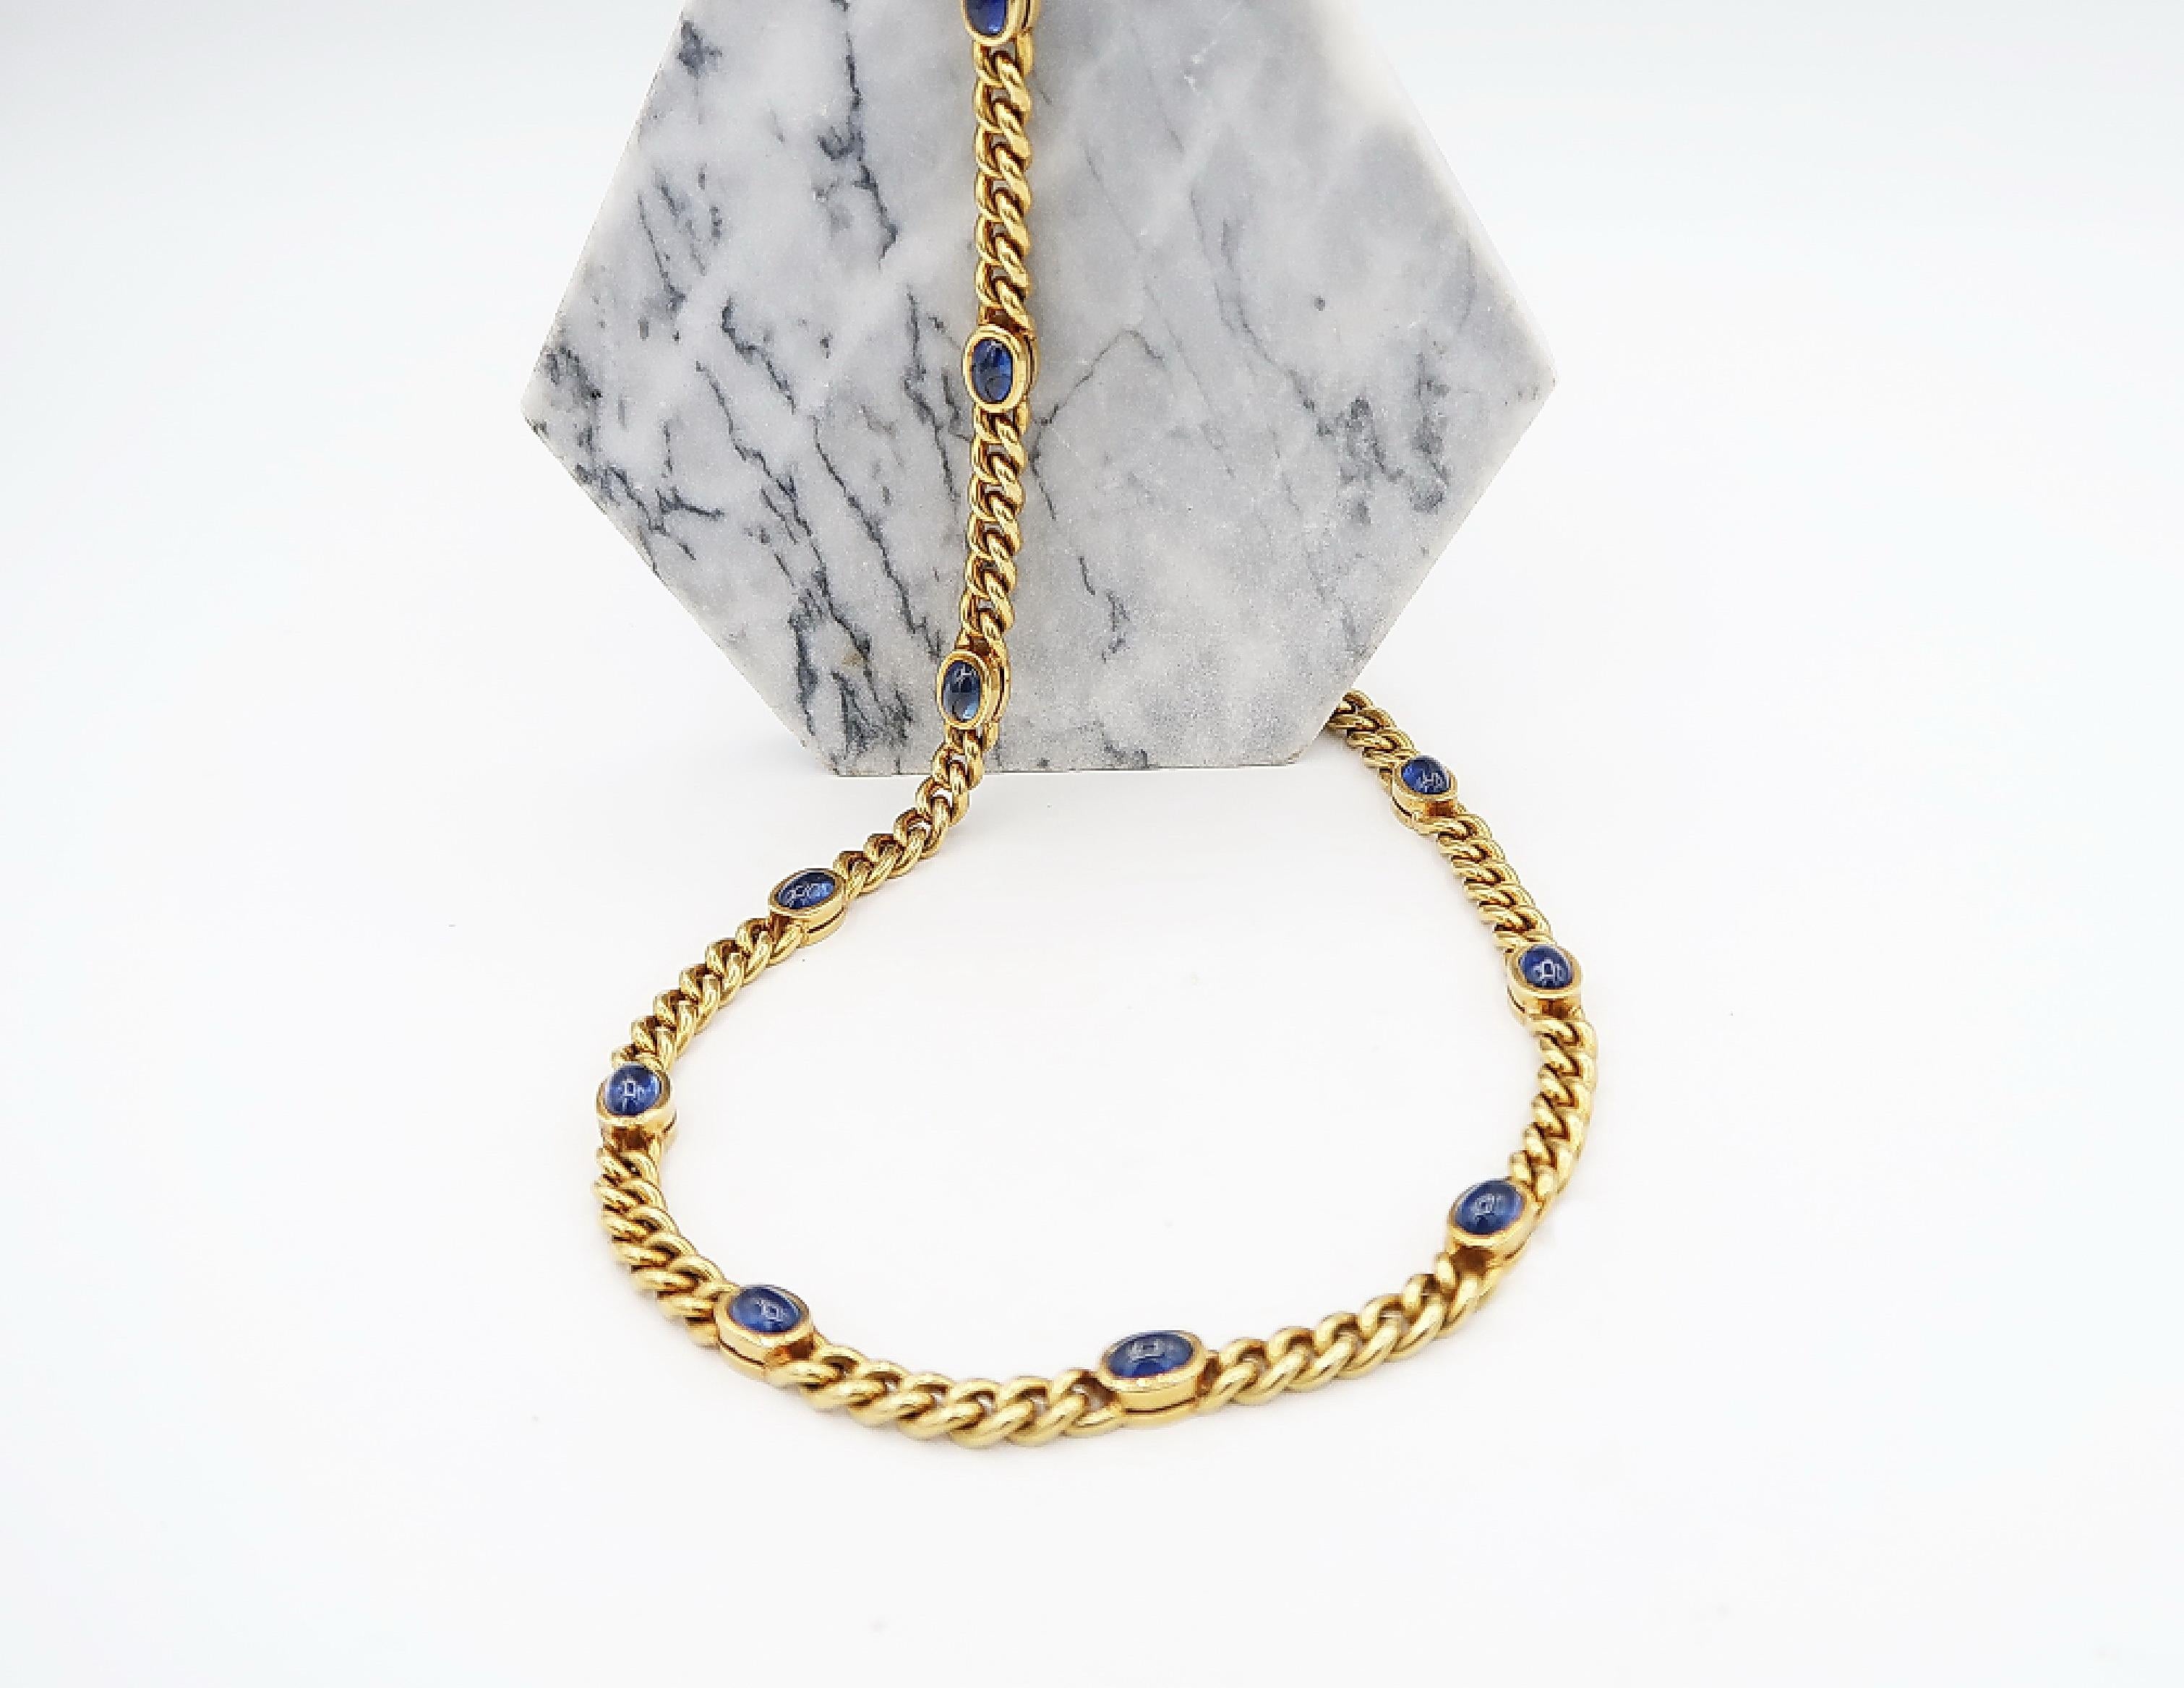 18K Yellow Gold Twisted Curb Chain Necklace with Bezel-Set Oval Cabochon Sapphires

Gold: 18K Yellow Gold 63.203 g
Sapphire: 13 pcs, Cabochon, 24.15 ct in total